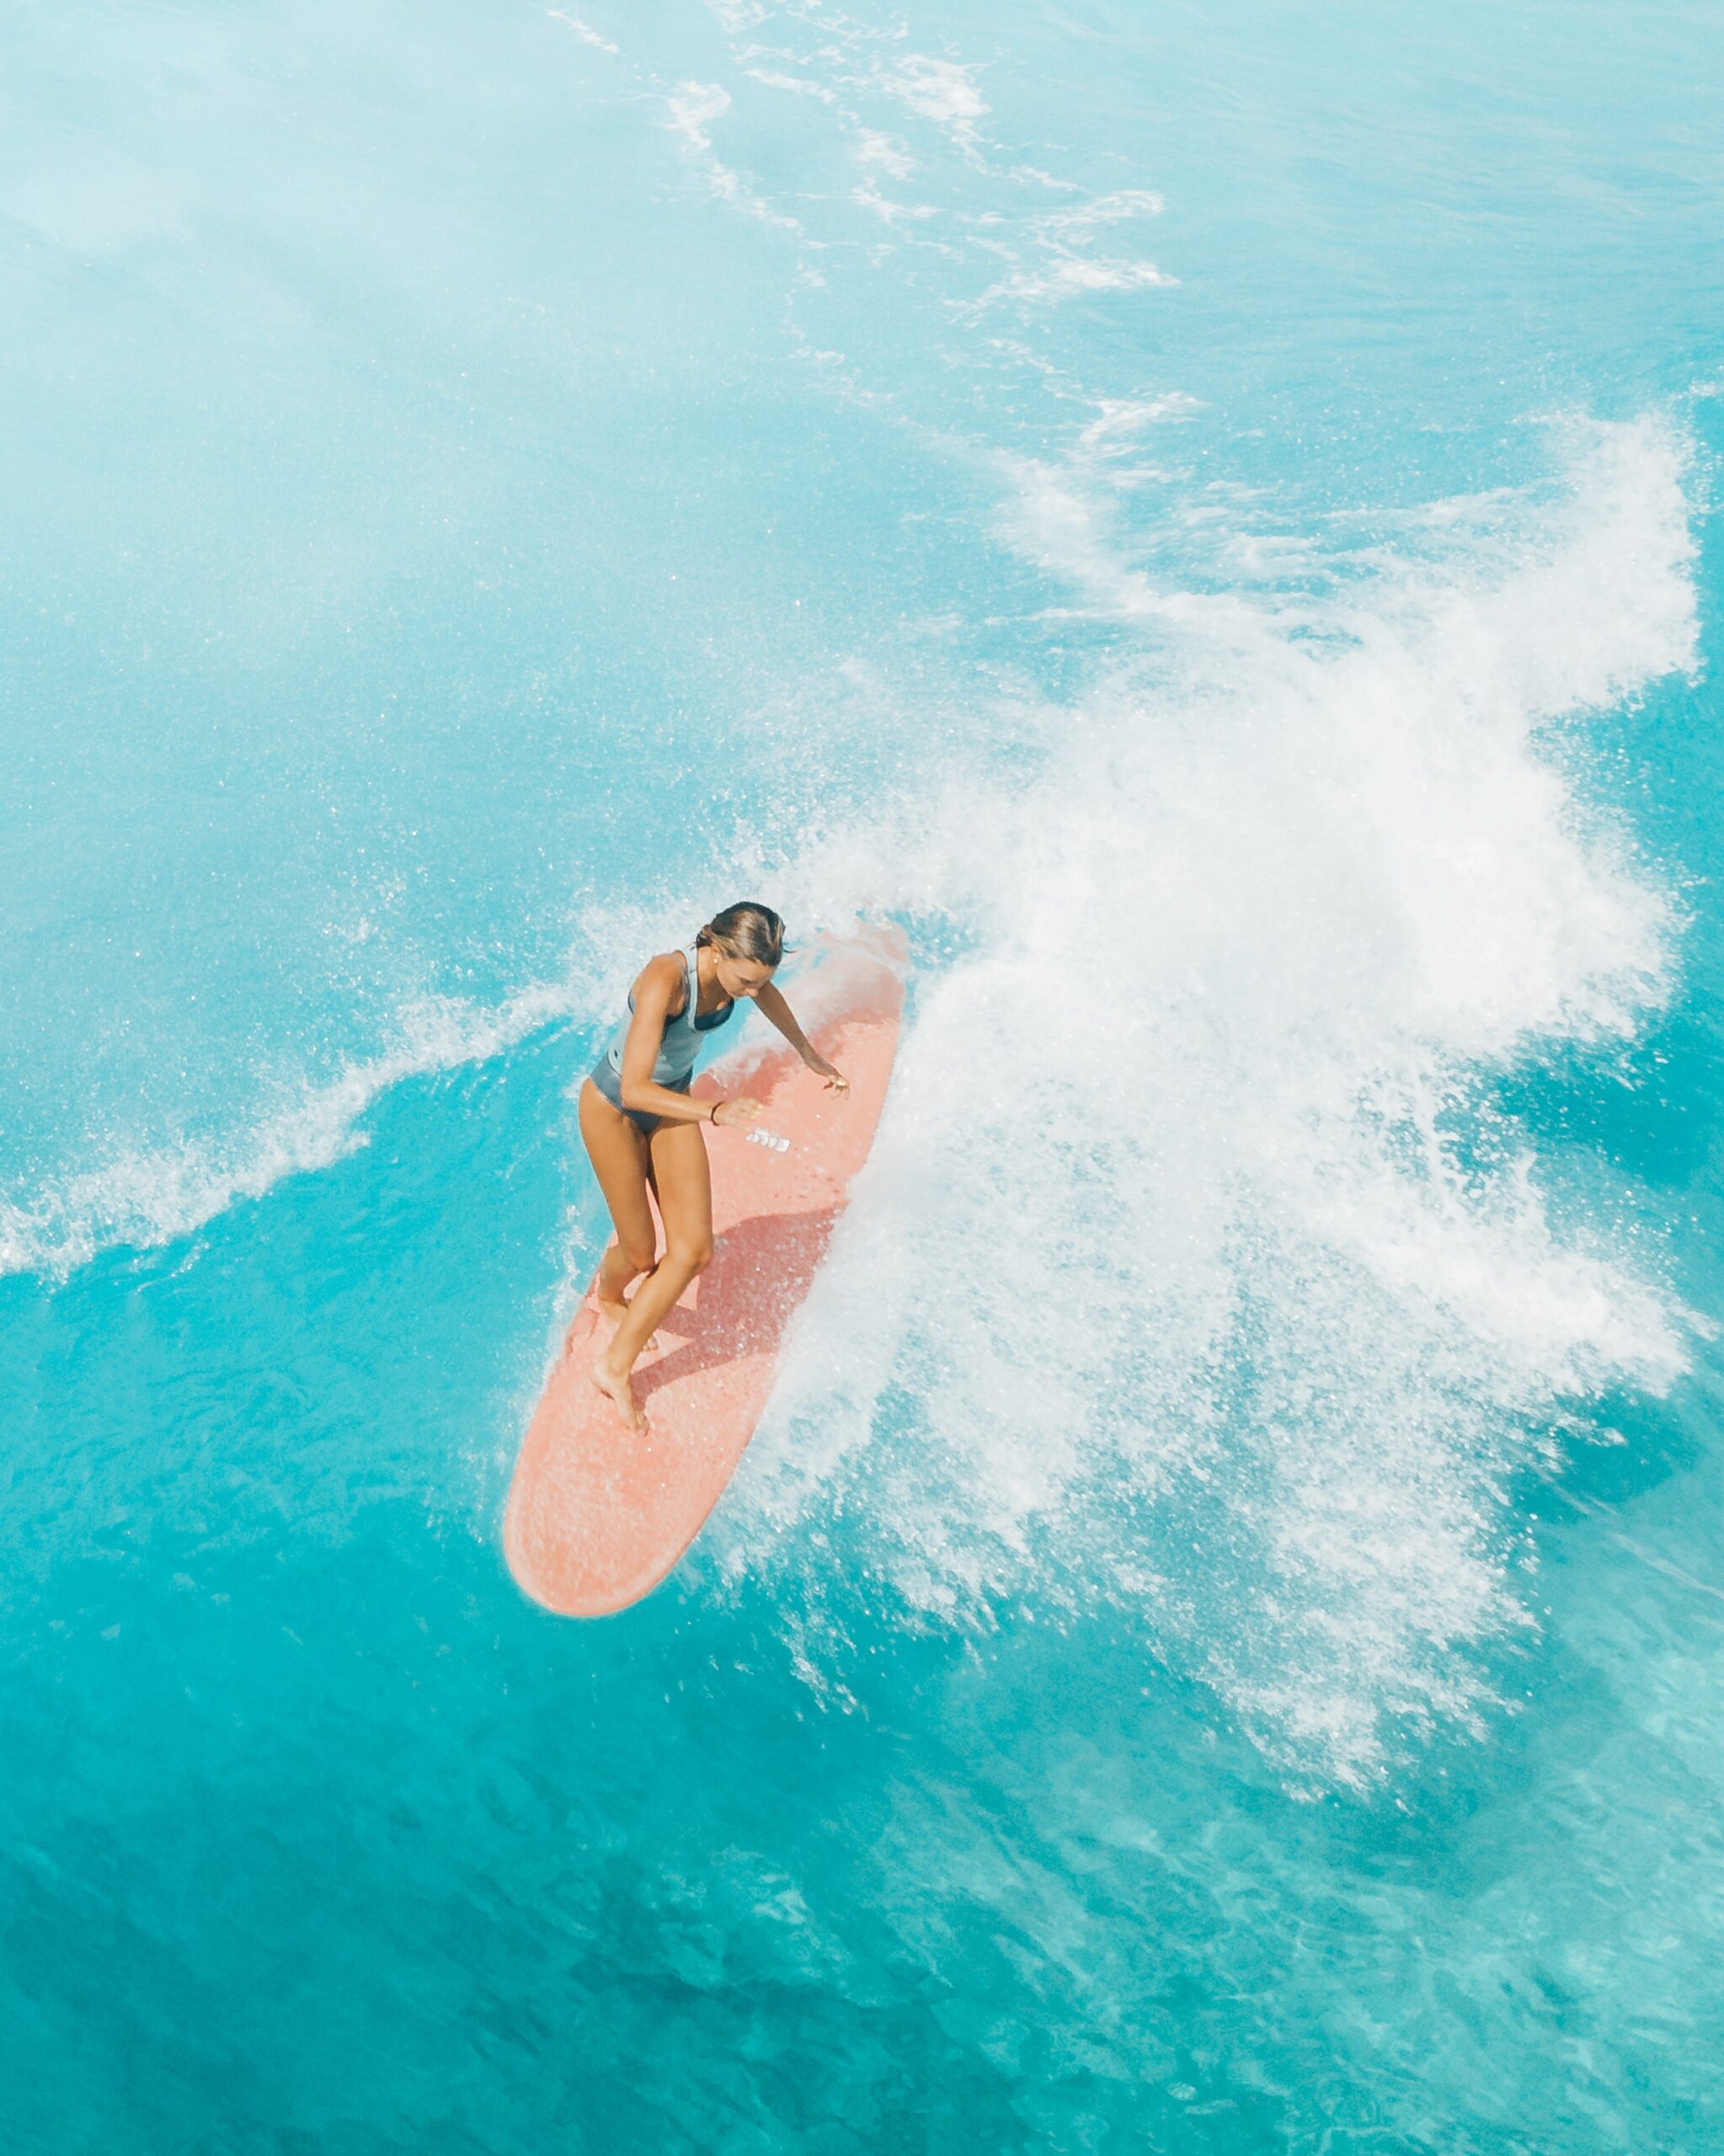 Something wonderful happens when women surf. We grow more confident in ourselves, we wash away the cares of the world and find our flow in life. Come and learn to surf with us! Feel sun-kissed and carefree, as you have fun with new friends, while surfing warm water waves.